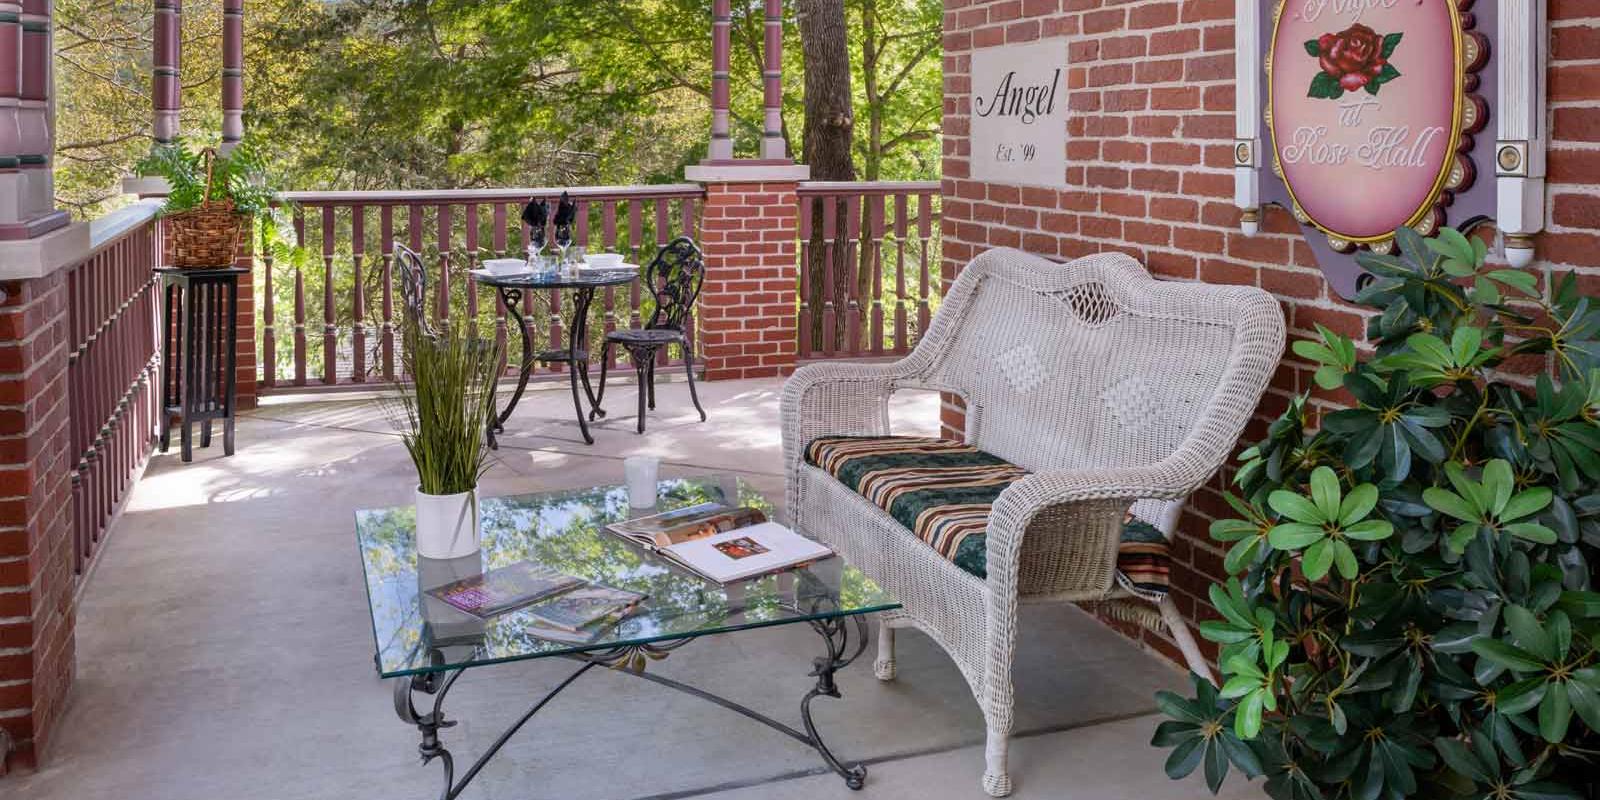 #1 Hotels in Eureka Springs AR | The Front Porch at The Angel at Rose Hall